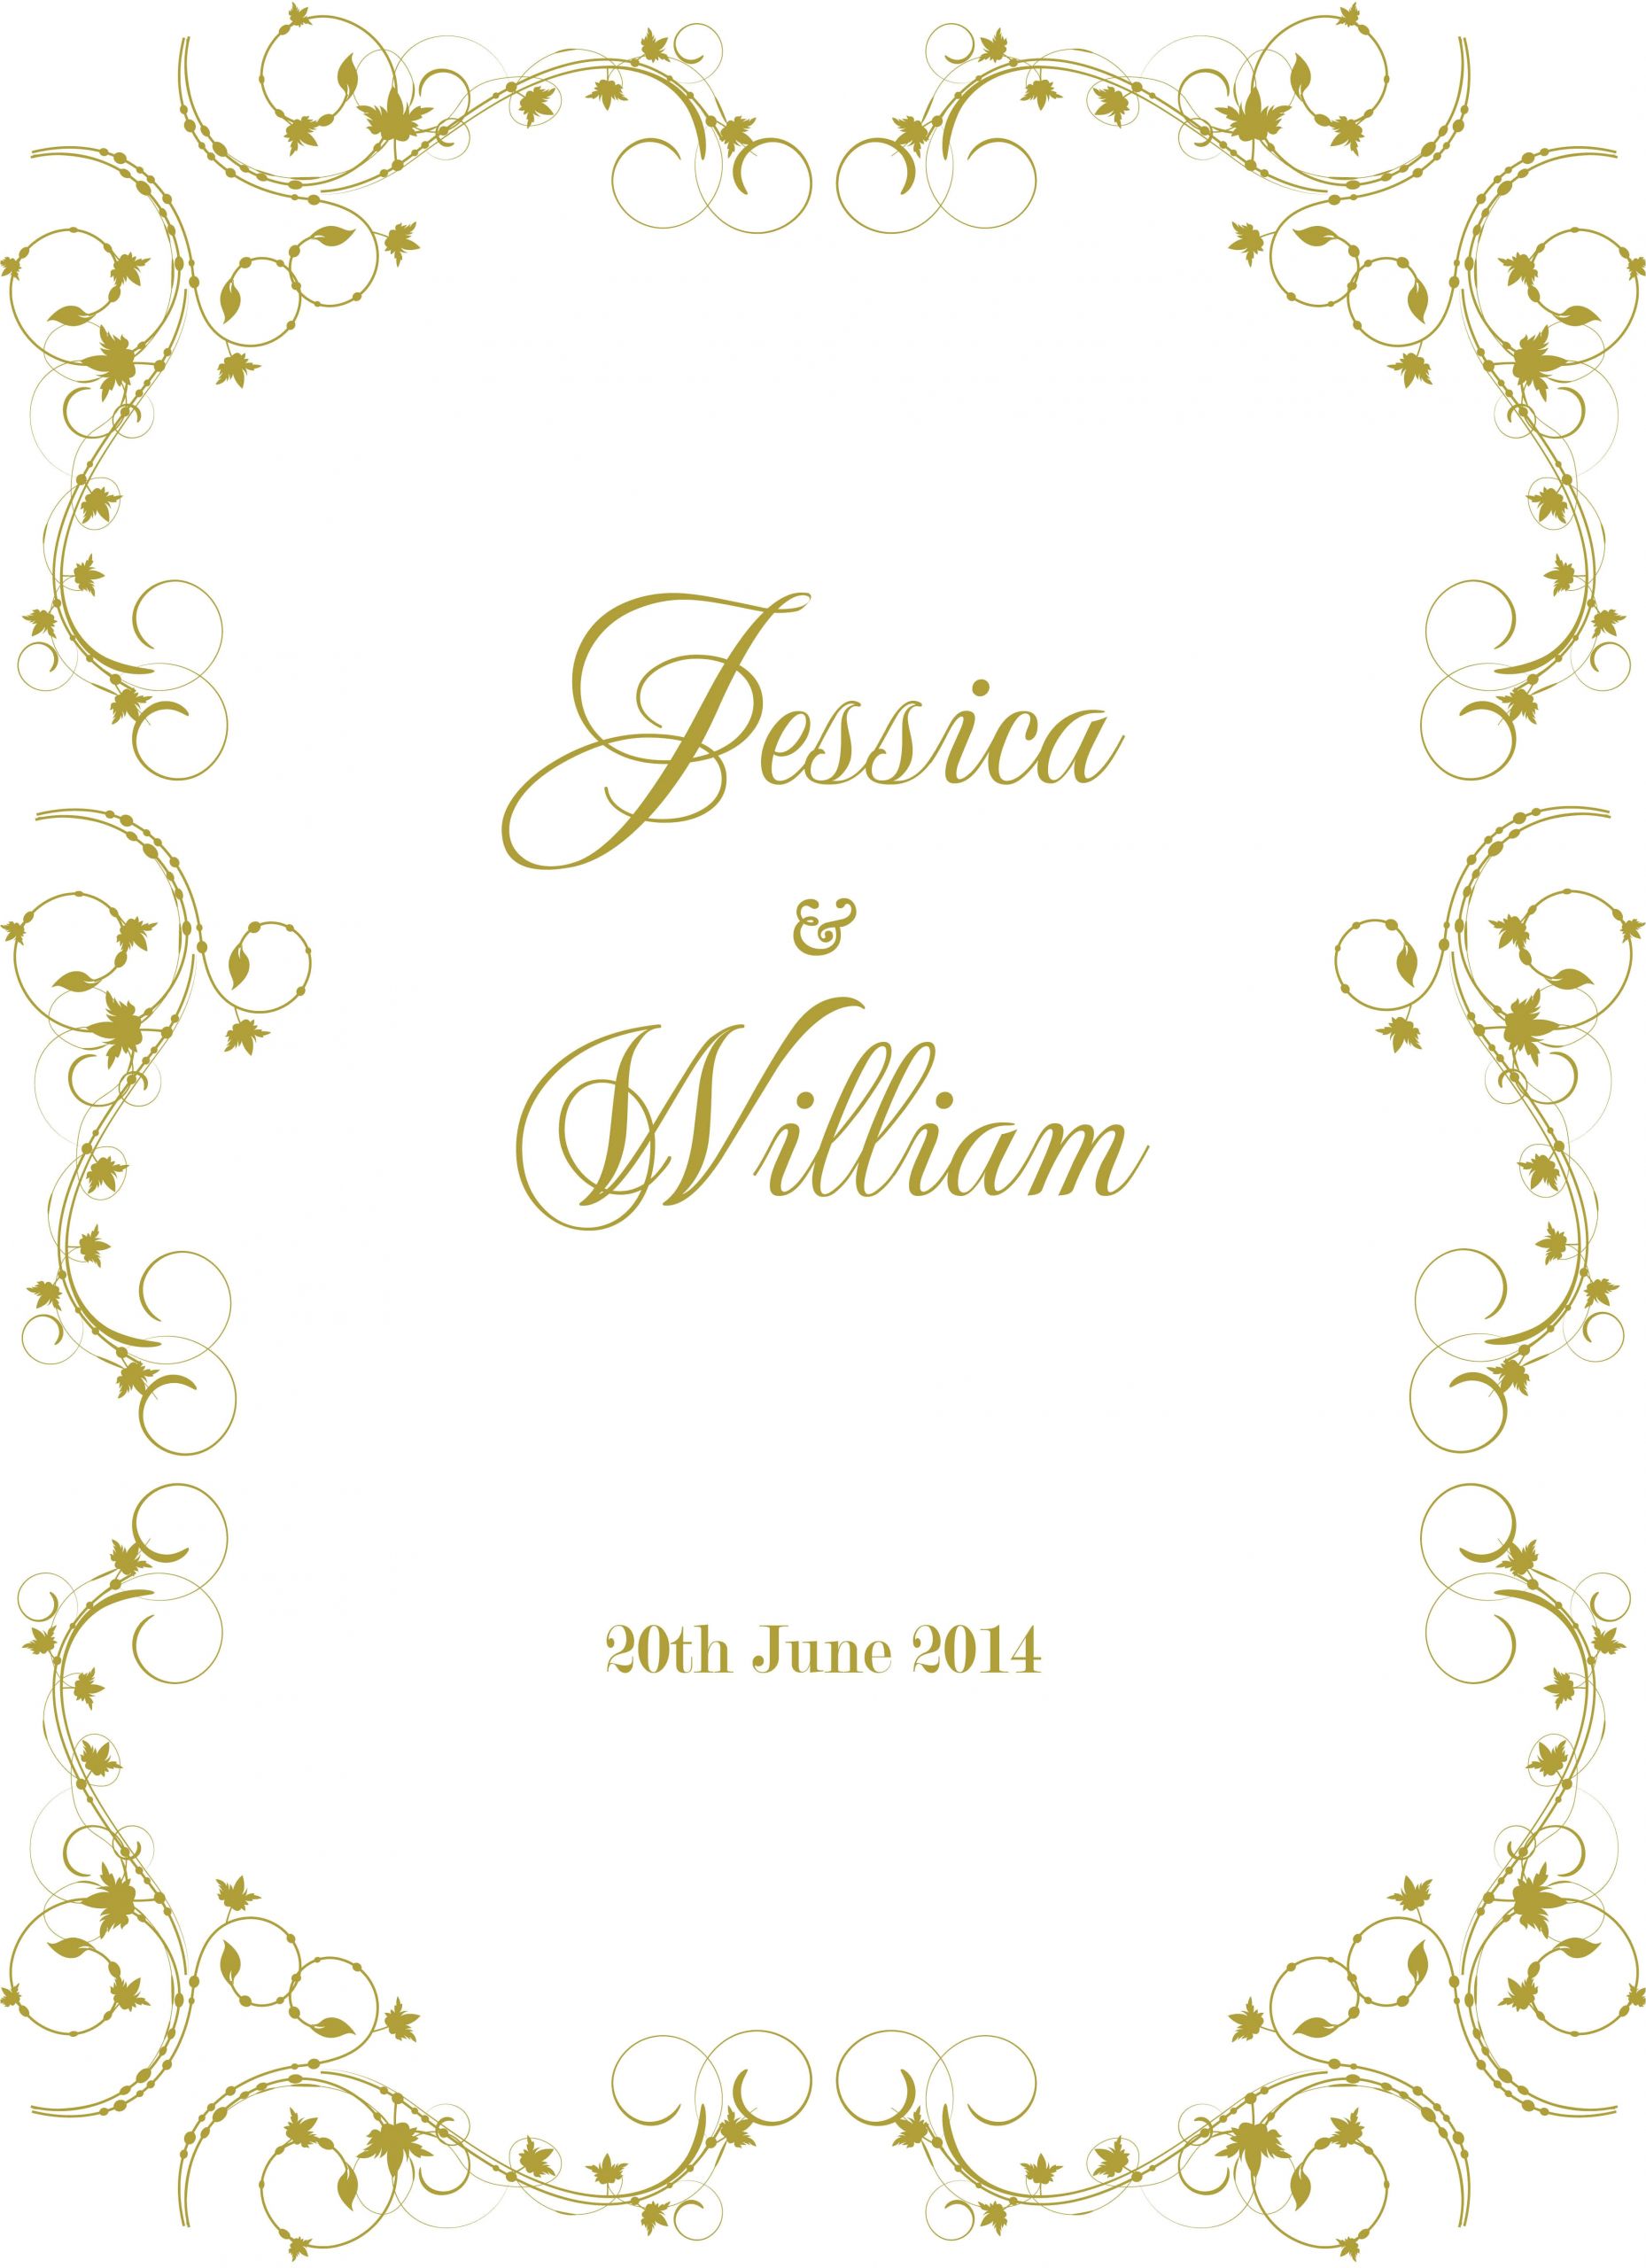 Border Designs for A Card Wedding Border Designs with Images Photo Wedding